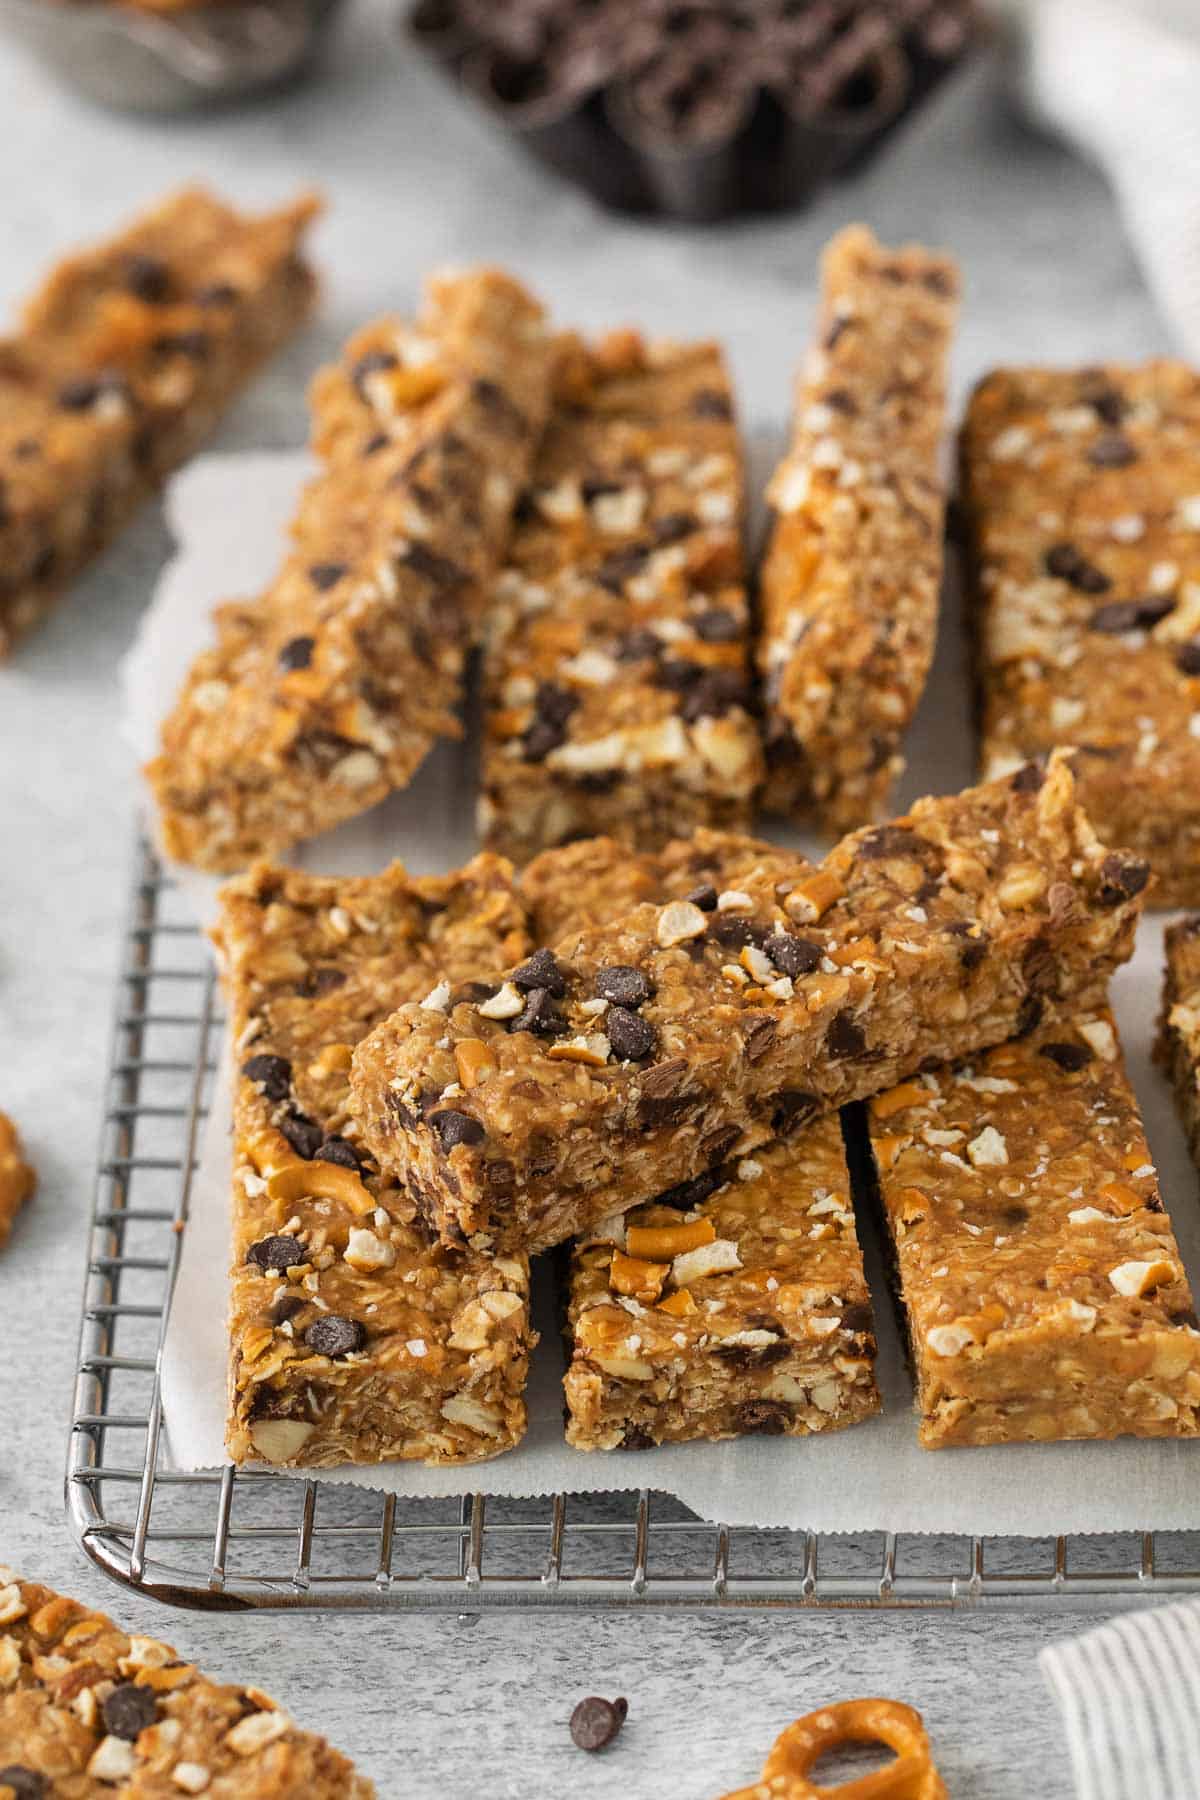 No-bake peanut butter oatmeal bars on a wire cooling rack